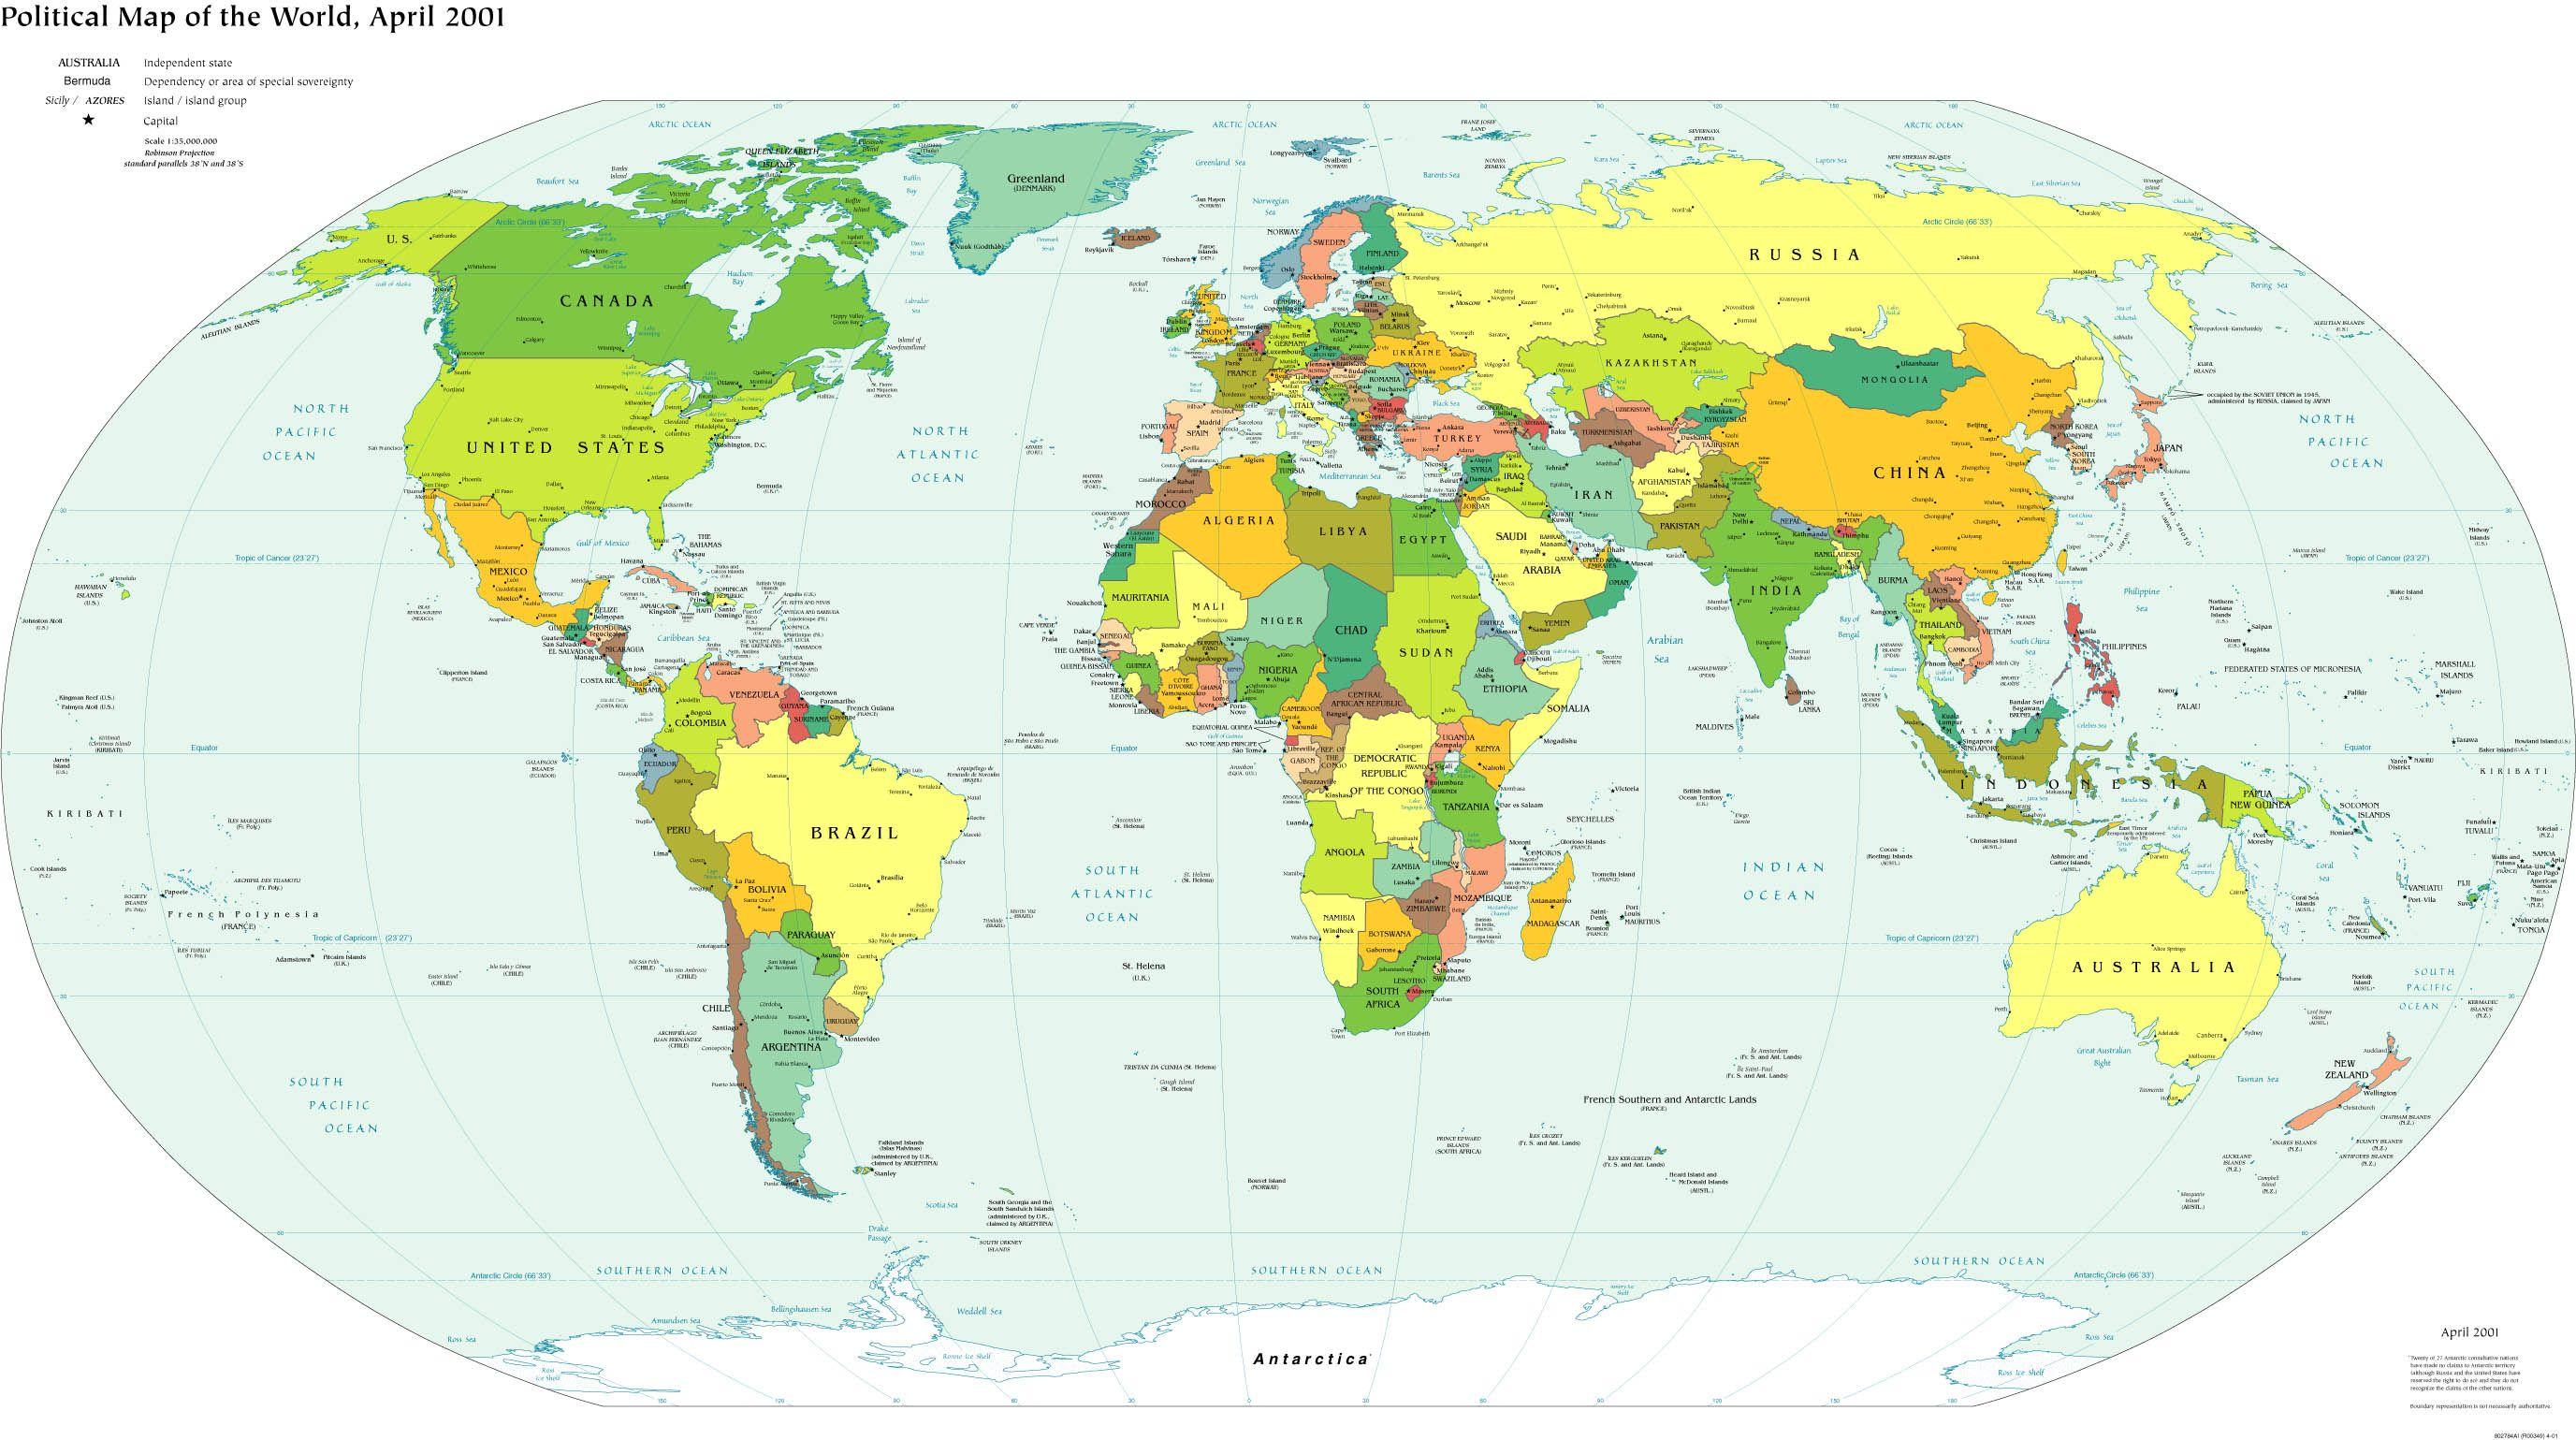 Maps download -> World Map, Map: Europe / USA / Asia / Oceania